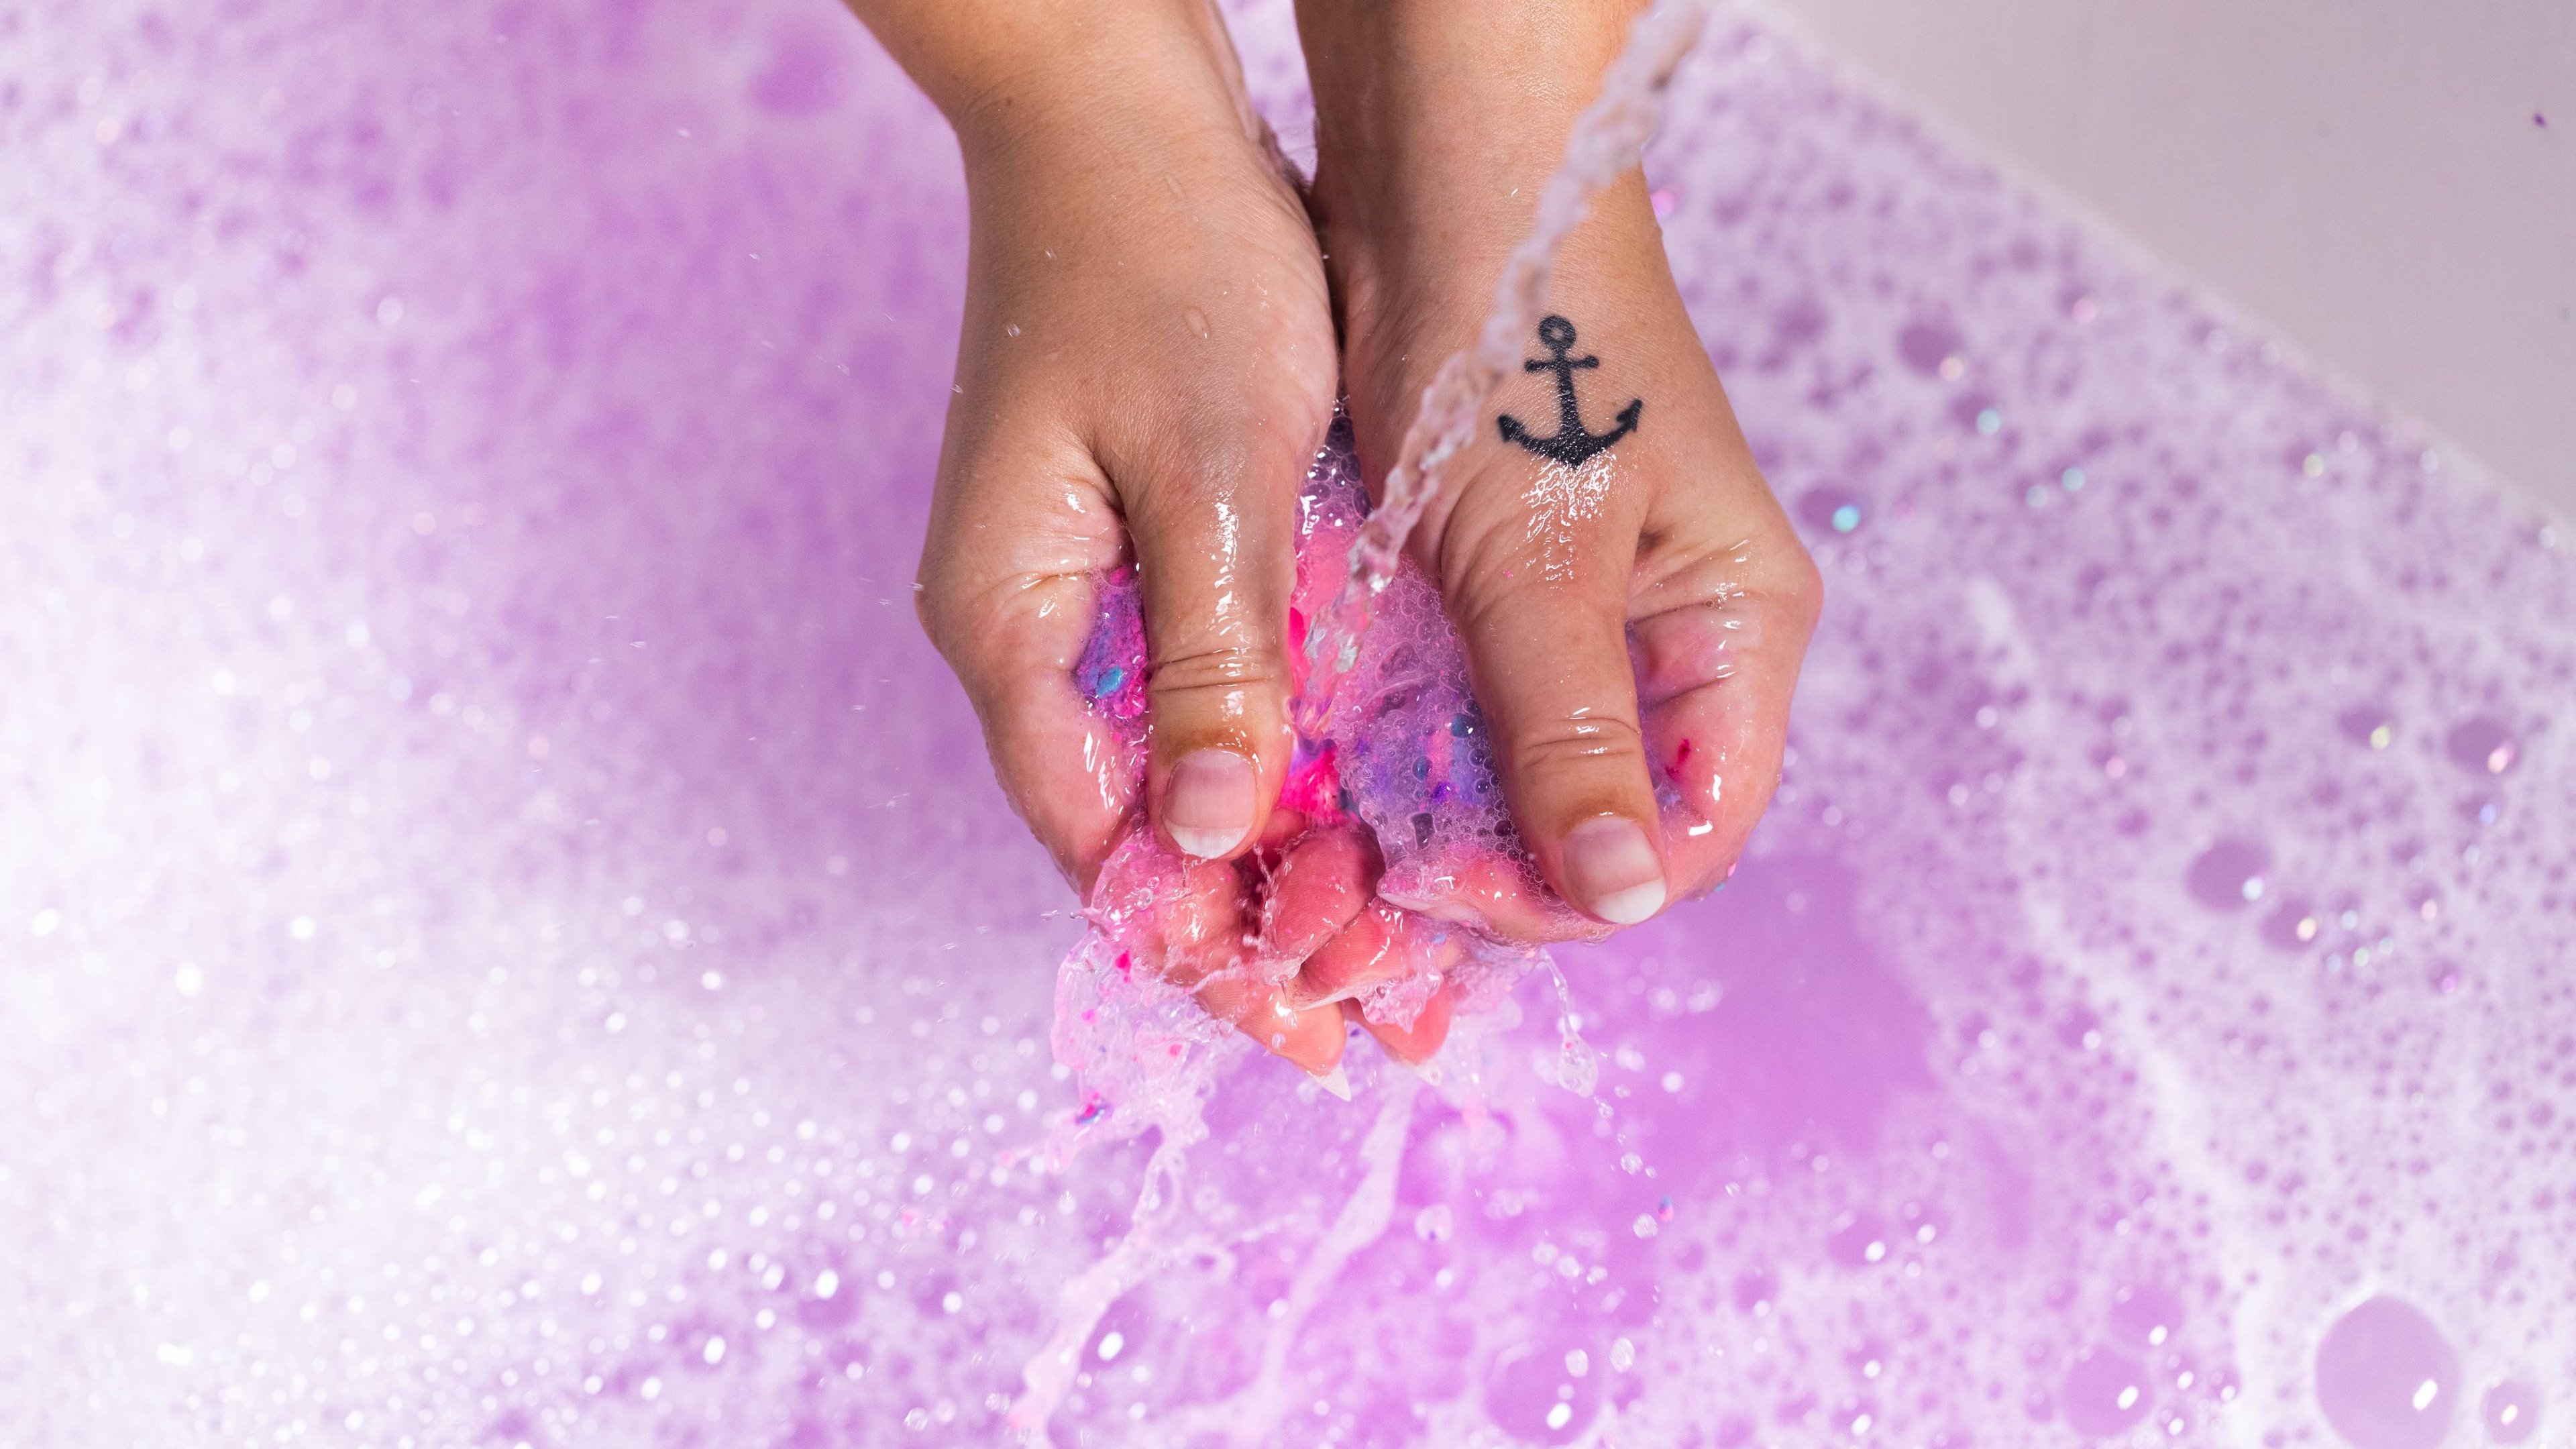 The image shows a close-up of the model's hand gently crumbling the mini Sleepy bubble bar under running water. 